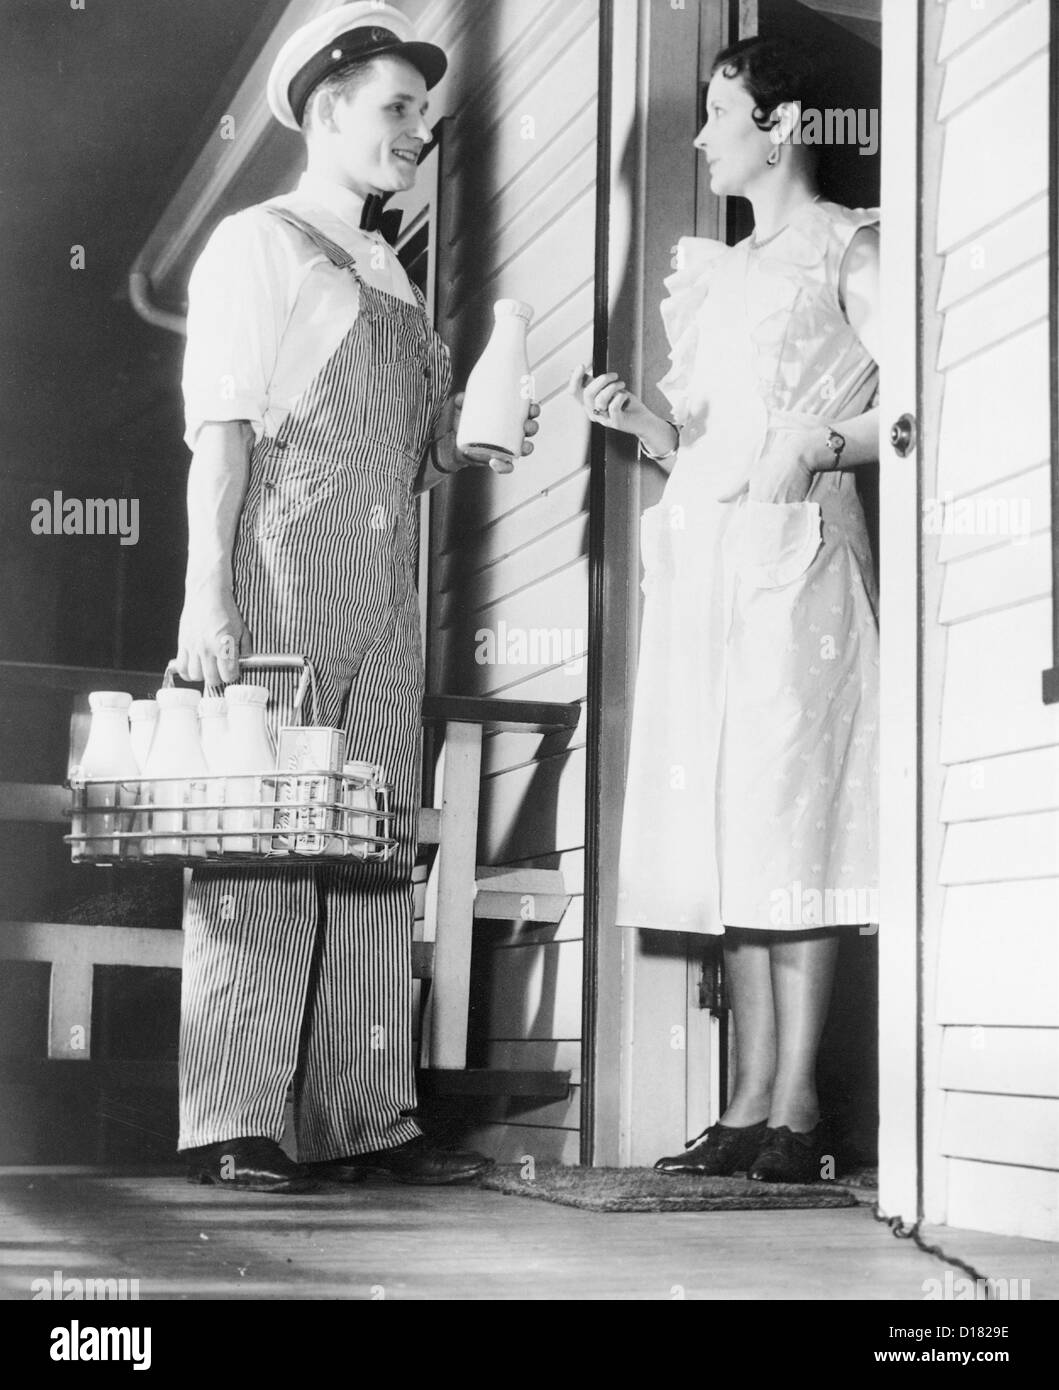 historic-shot-of-milk-man-delivering-milk-to-housewife-D1829E.jpg